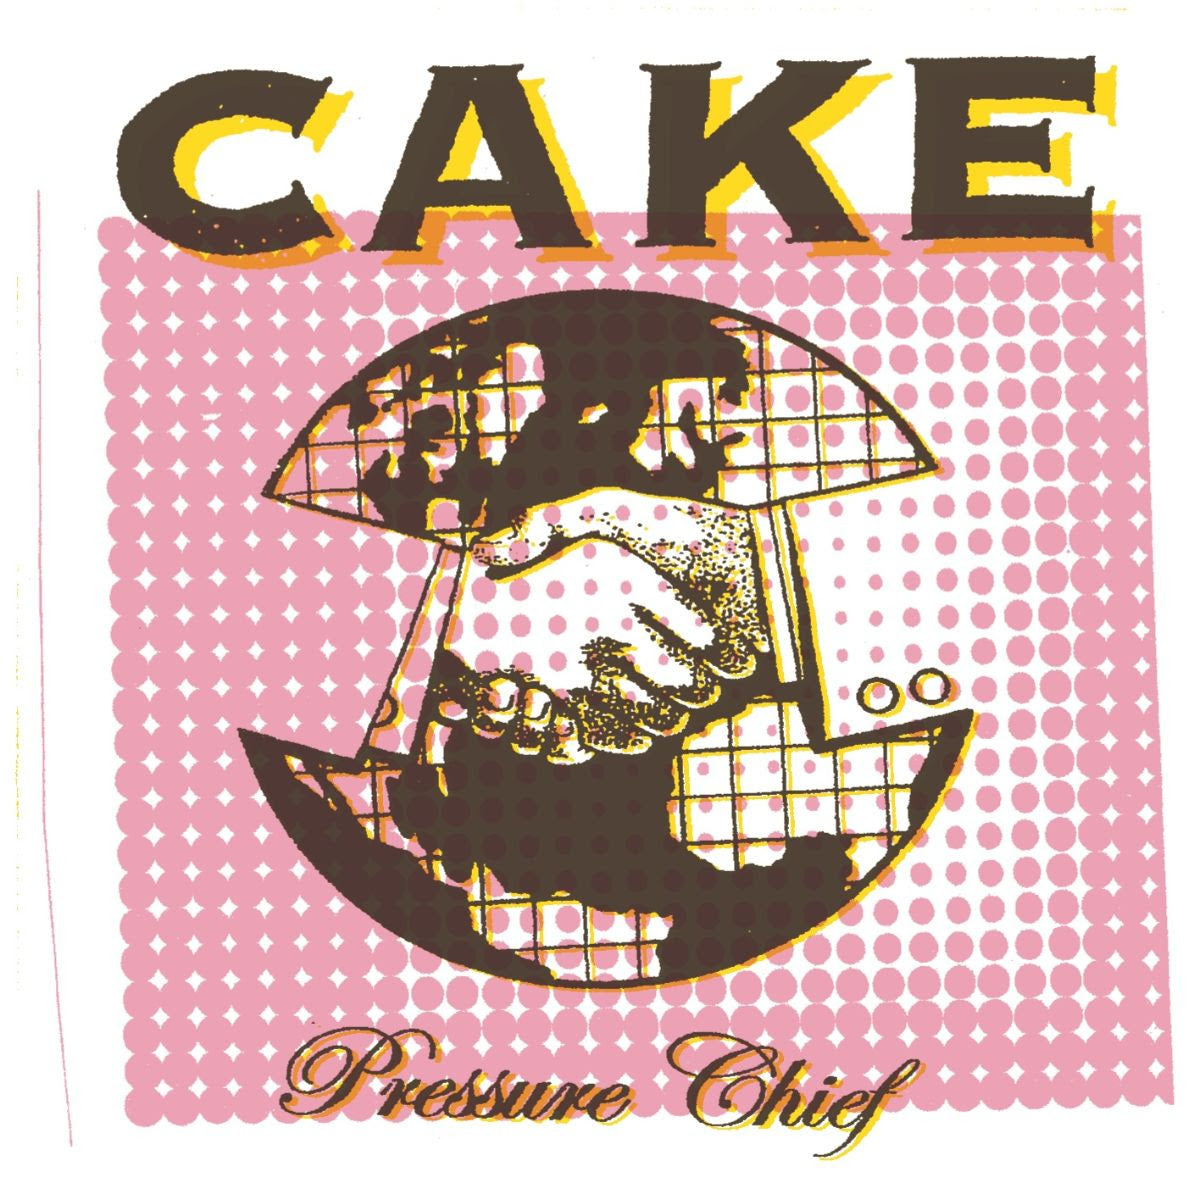 Cake - Pressure Chief | Buy the Vinyl LP from Flying Nun Records